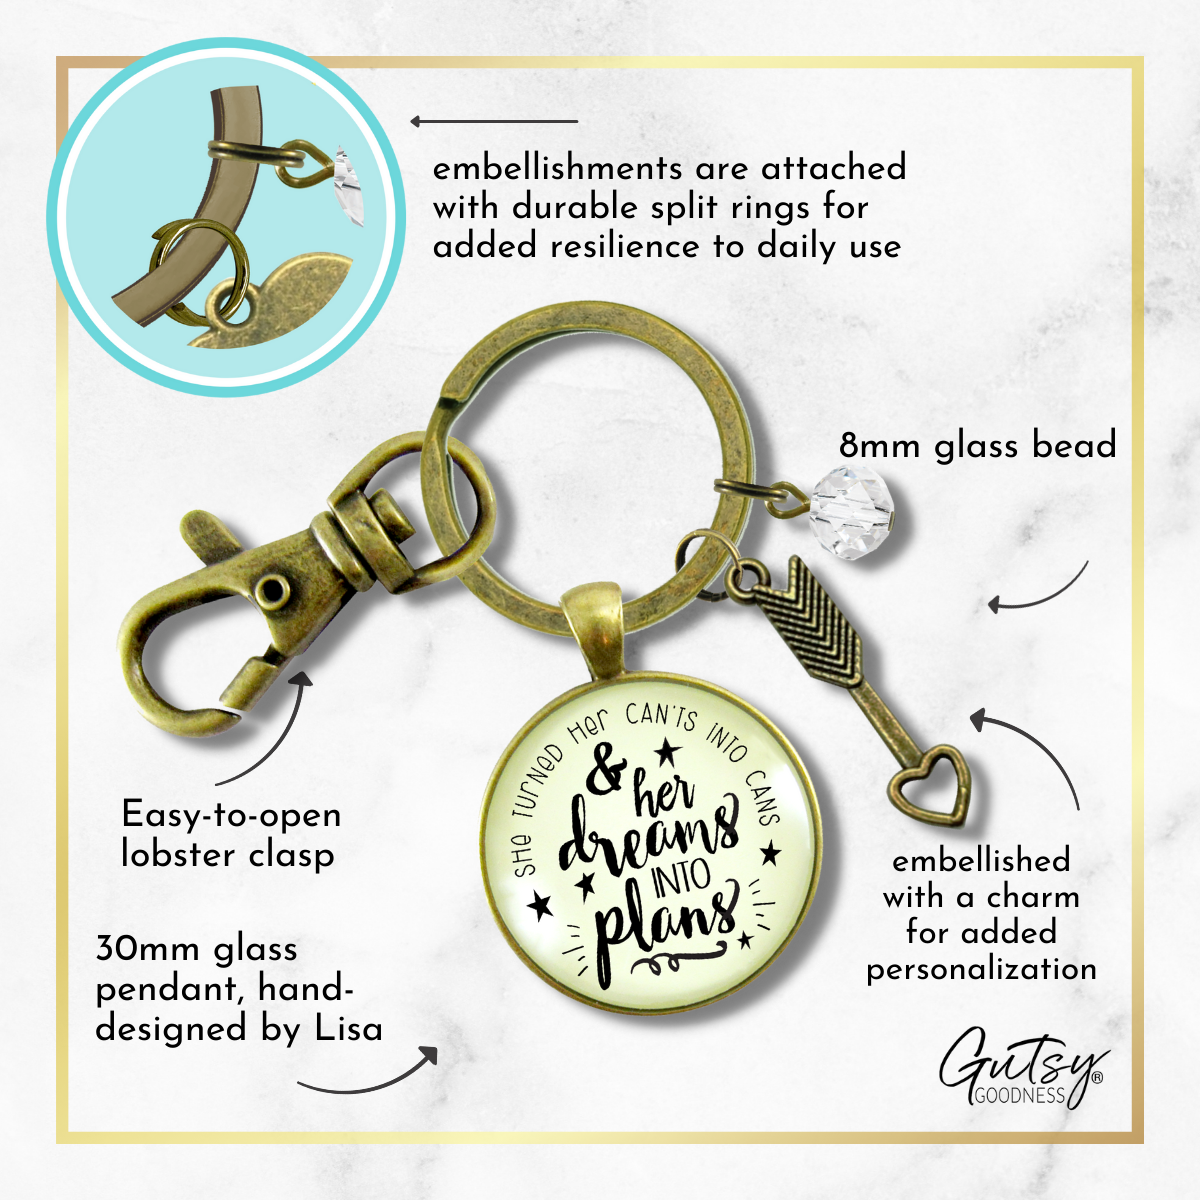 Dreams Into Plans Keychain Positive Life Words Boss Lady Jewelry - Gutsy Goodness Handmade Jewelry;Dreams Into Plans Keychain Positive Life Words Boss Lady Jewelry - Gutsy Goodness Handmade Jewelry Gifts